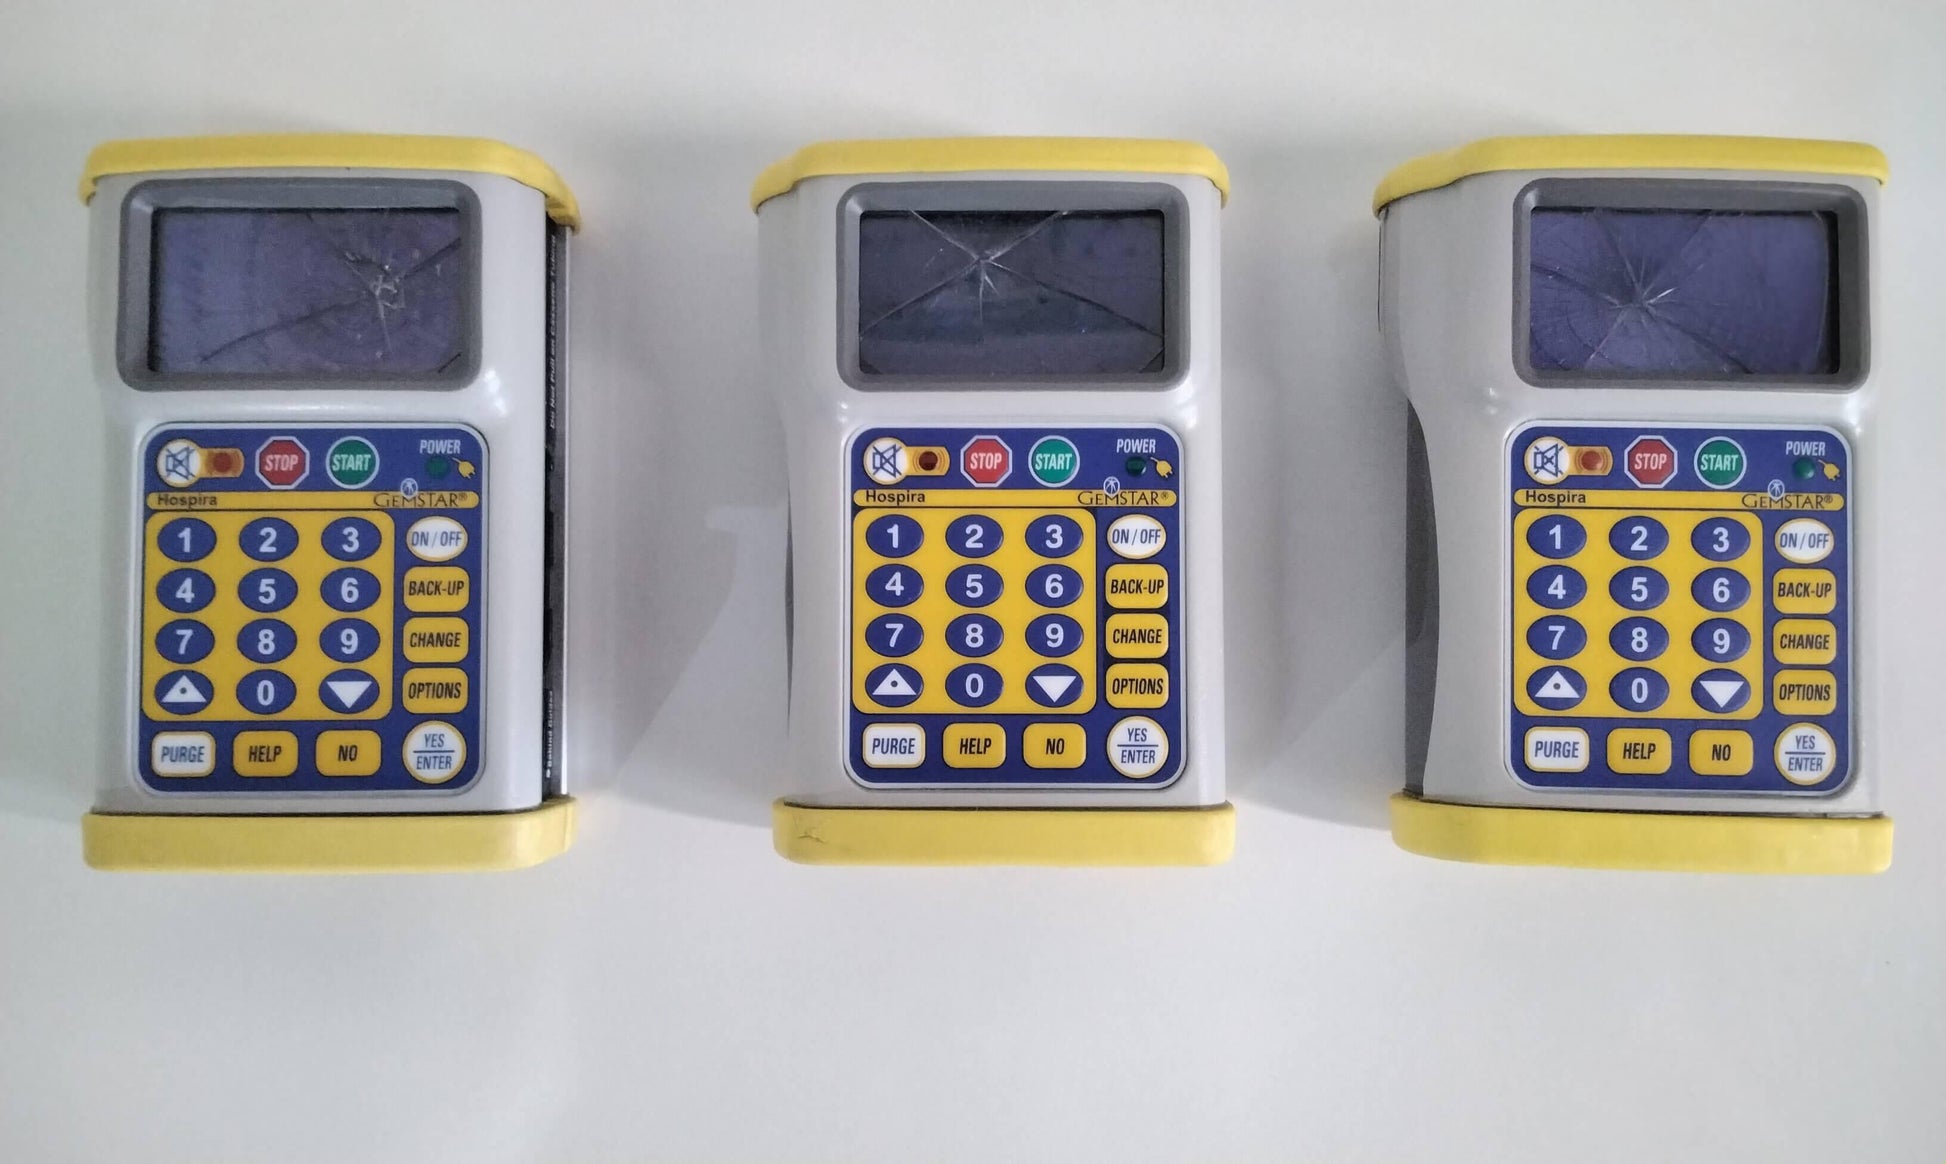 Damaged Lot of 3 Hospira Gemstar Yellow Pain Management Infusion Pump 13088 with Free Shipping - MBR Medicals